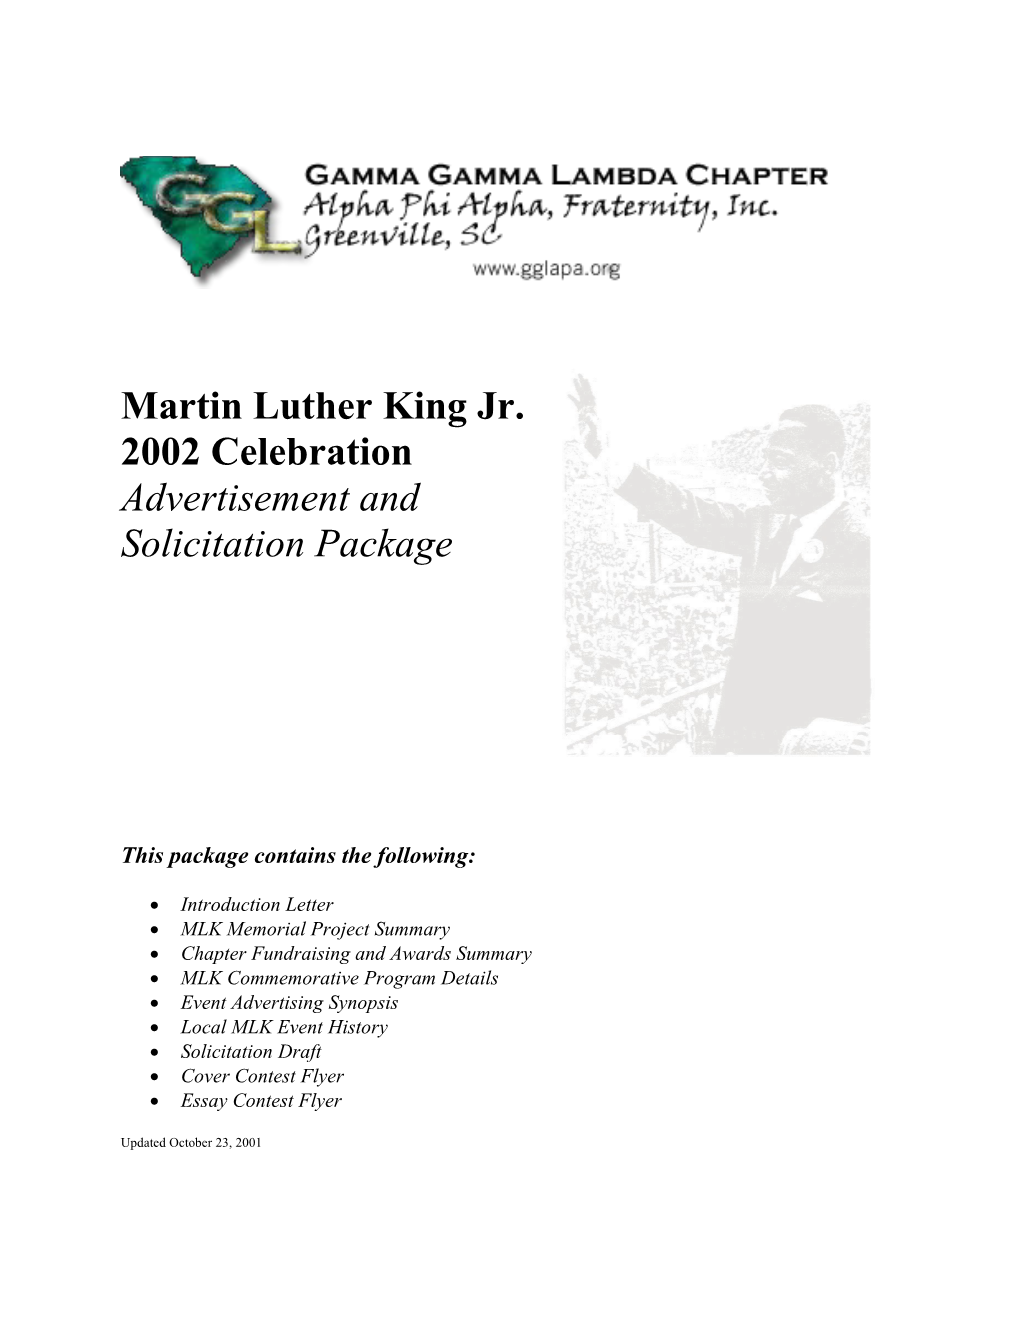 MLK Ad and Solicitation Package